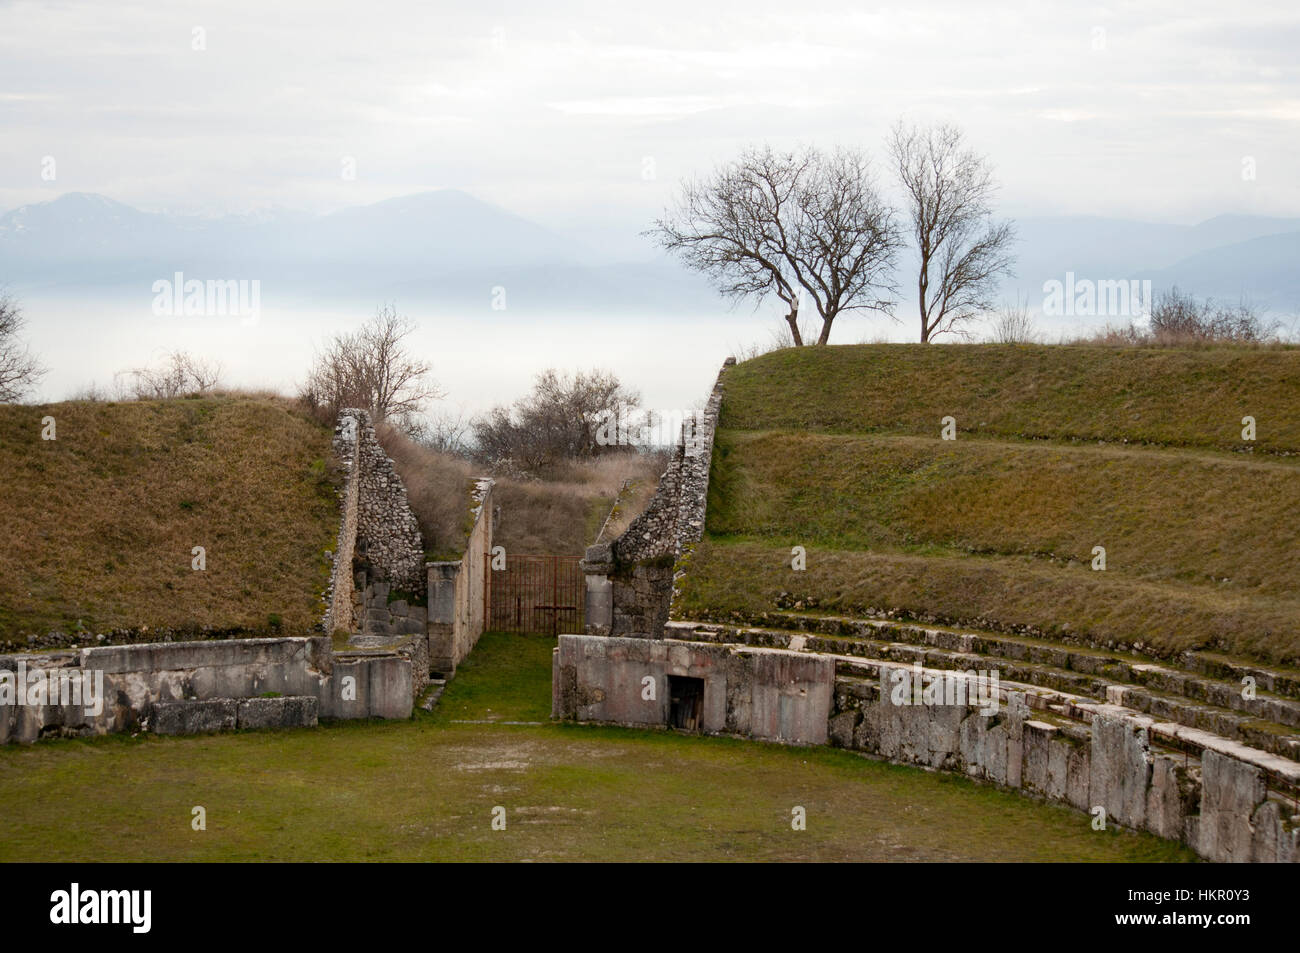 ALBA FUCENS, Abruzzo, Italy: A detail of an ancient Roman Amphitheater dating the first half of the first century AD. Stock Photo